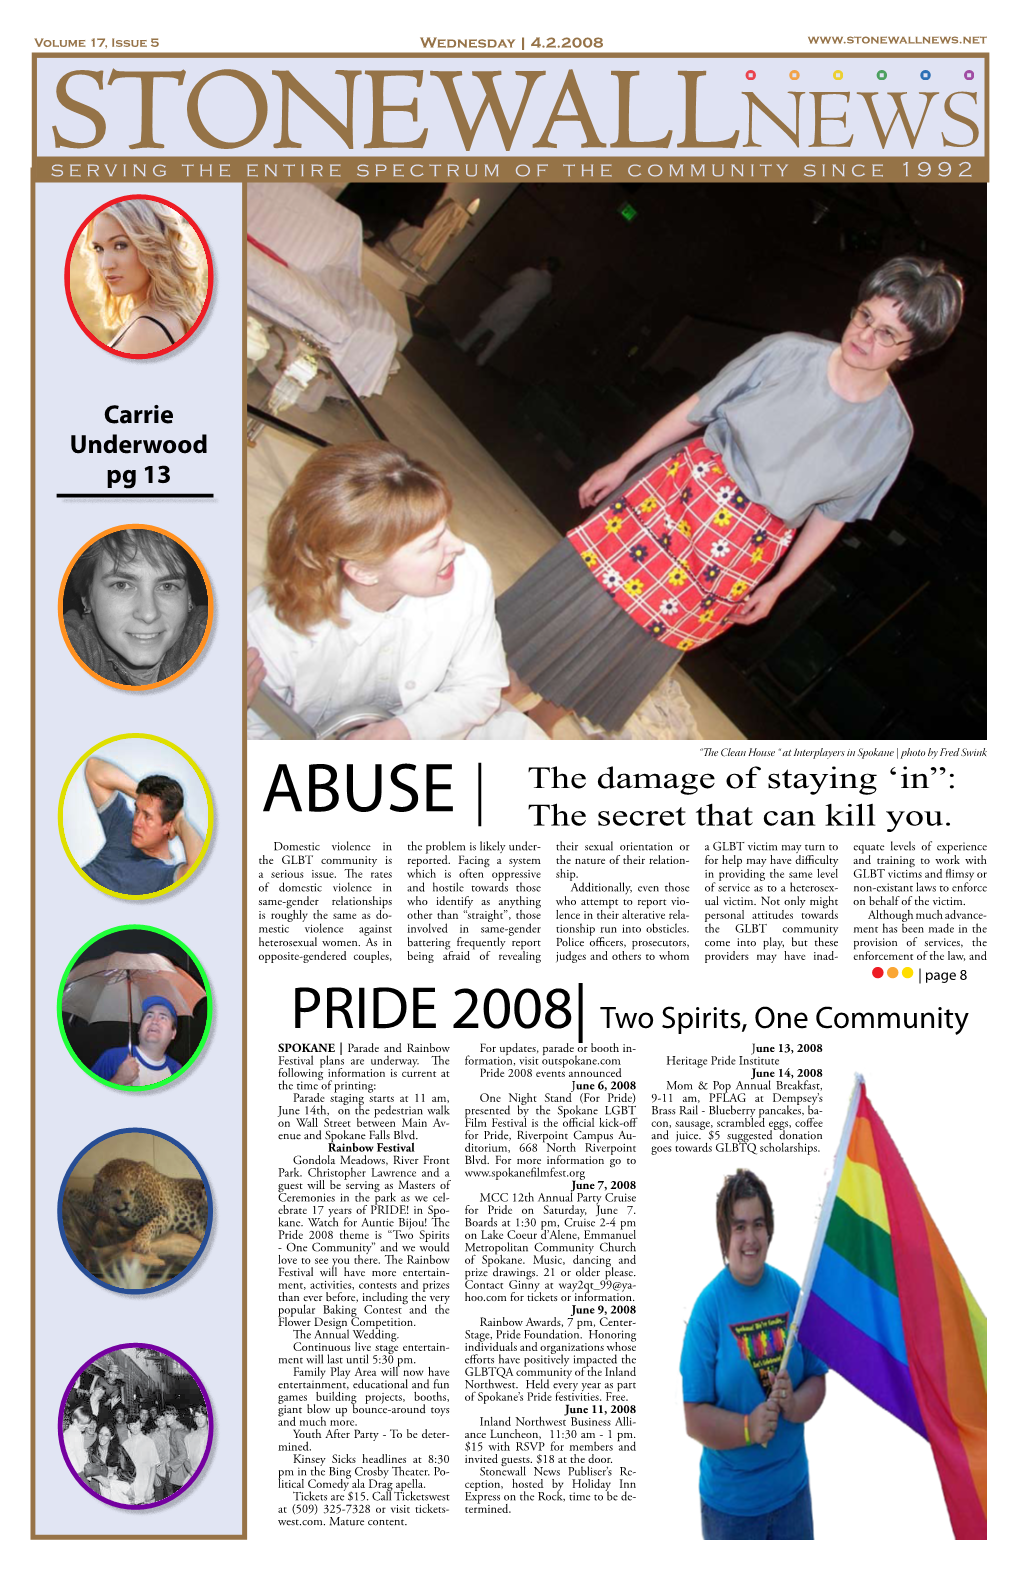 PRIDE 2008| Two Spirits, One Community ABUSE | the Damage of Staying 'In”: the Secret That Can Kill You